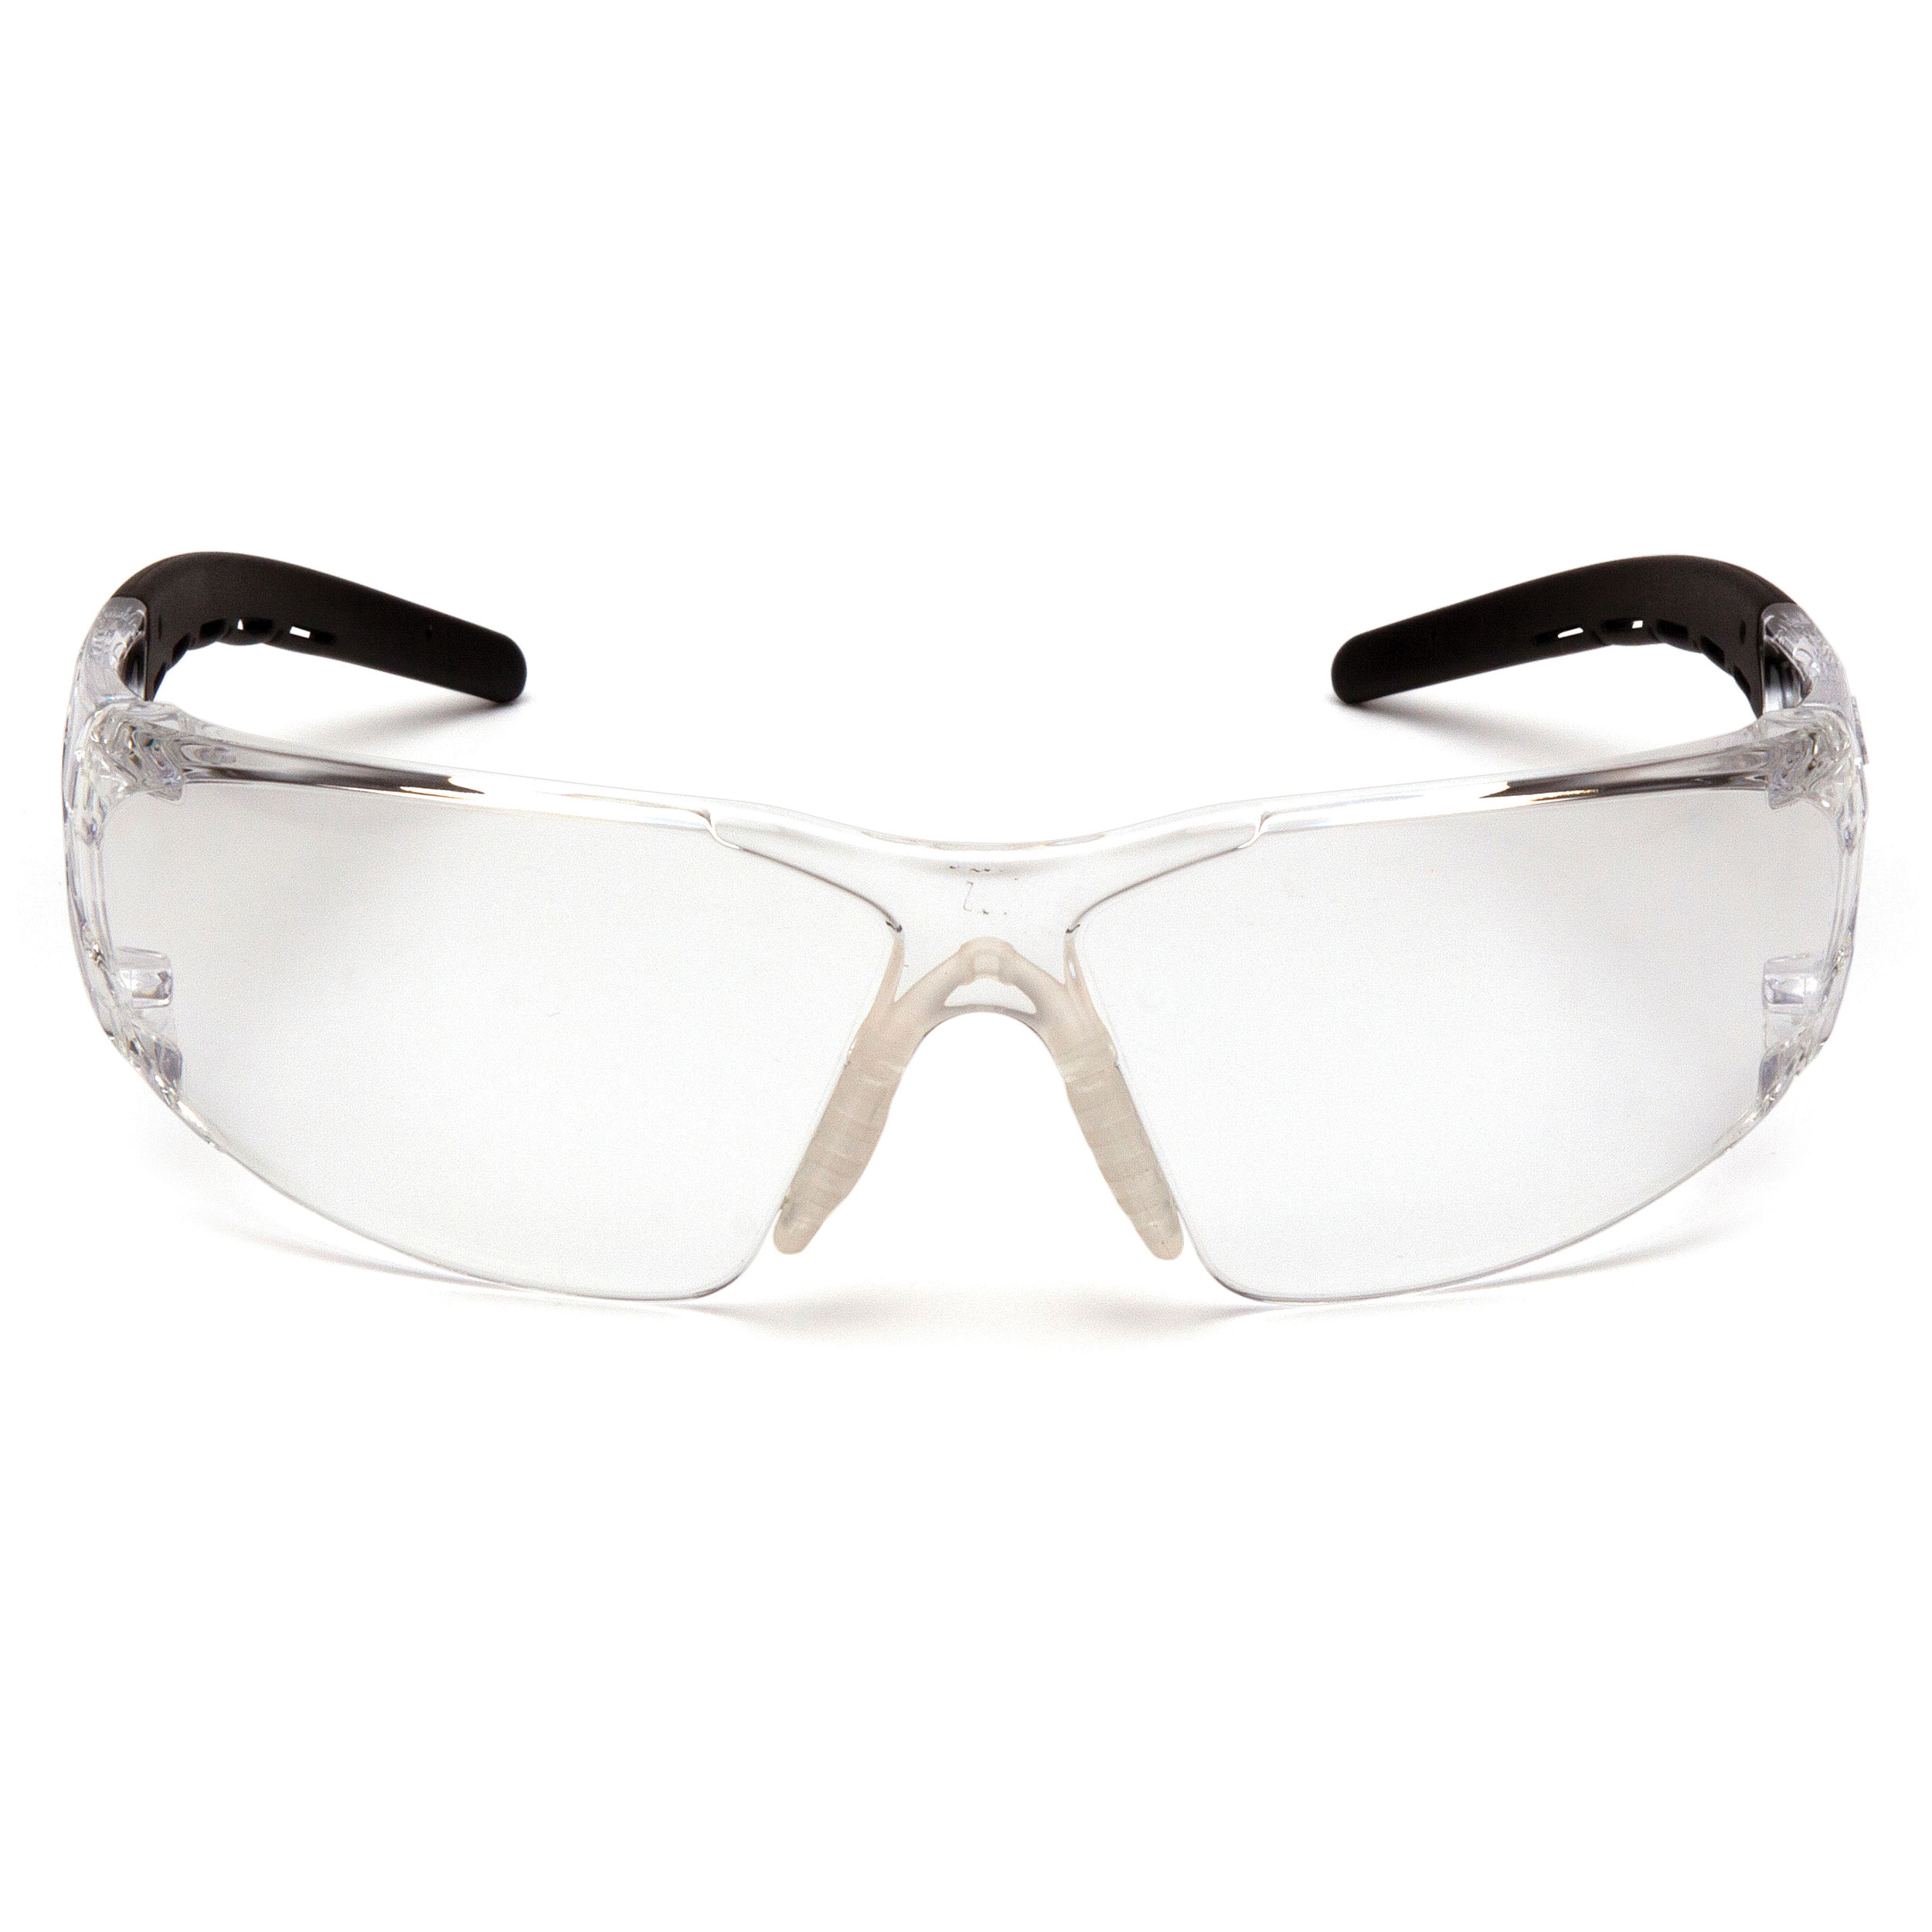 Fyxate Safety Glasses